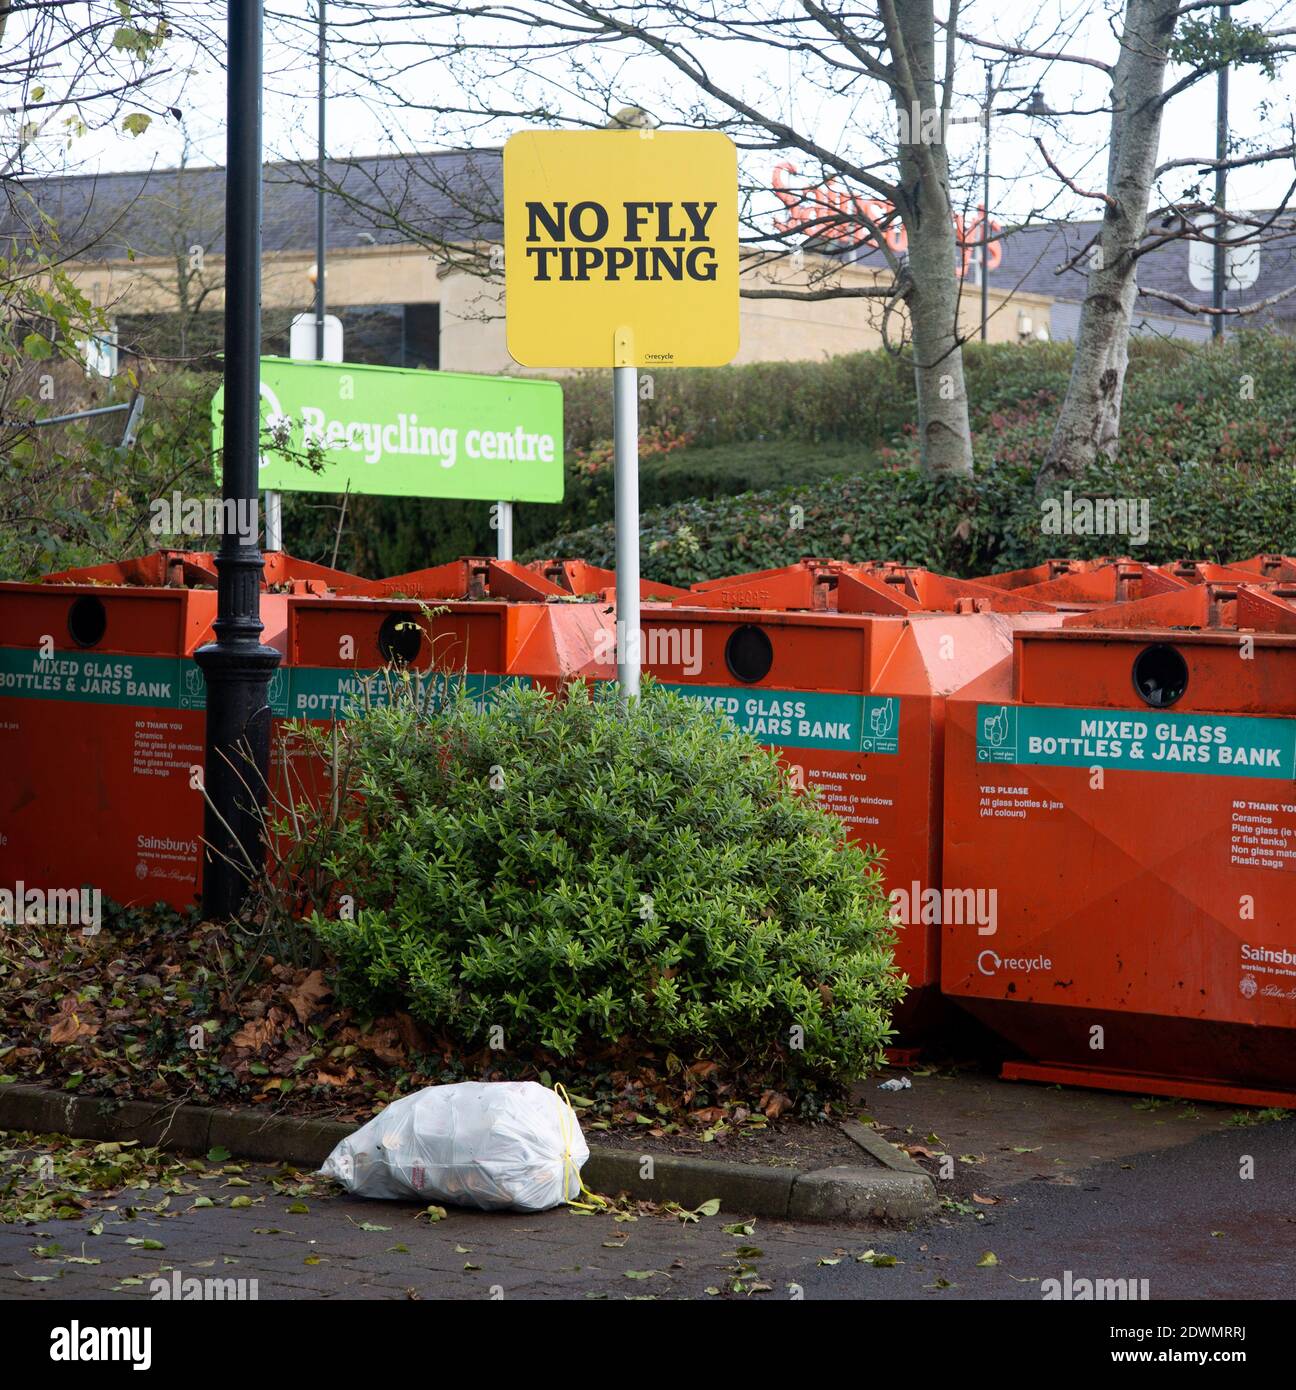 Rubbish bag dumped beneath No Fly Tipping sign, Sainsbury's recycling centre, Calne, England Stock Photo